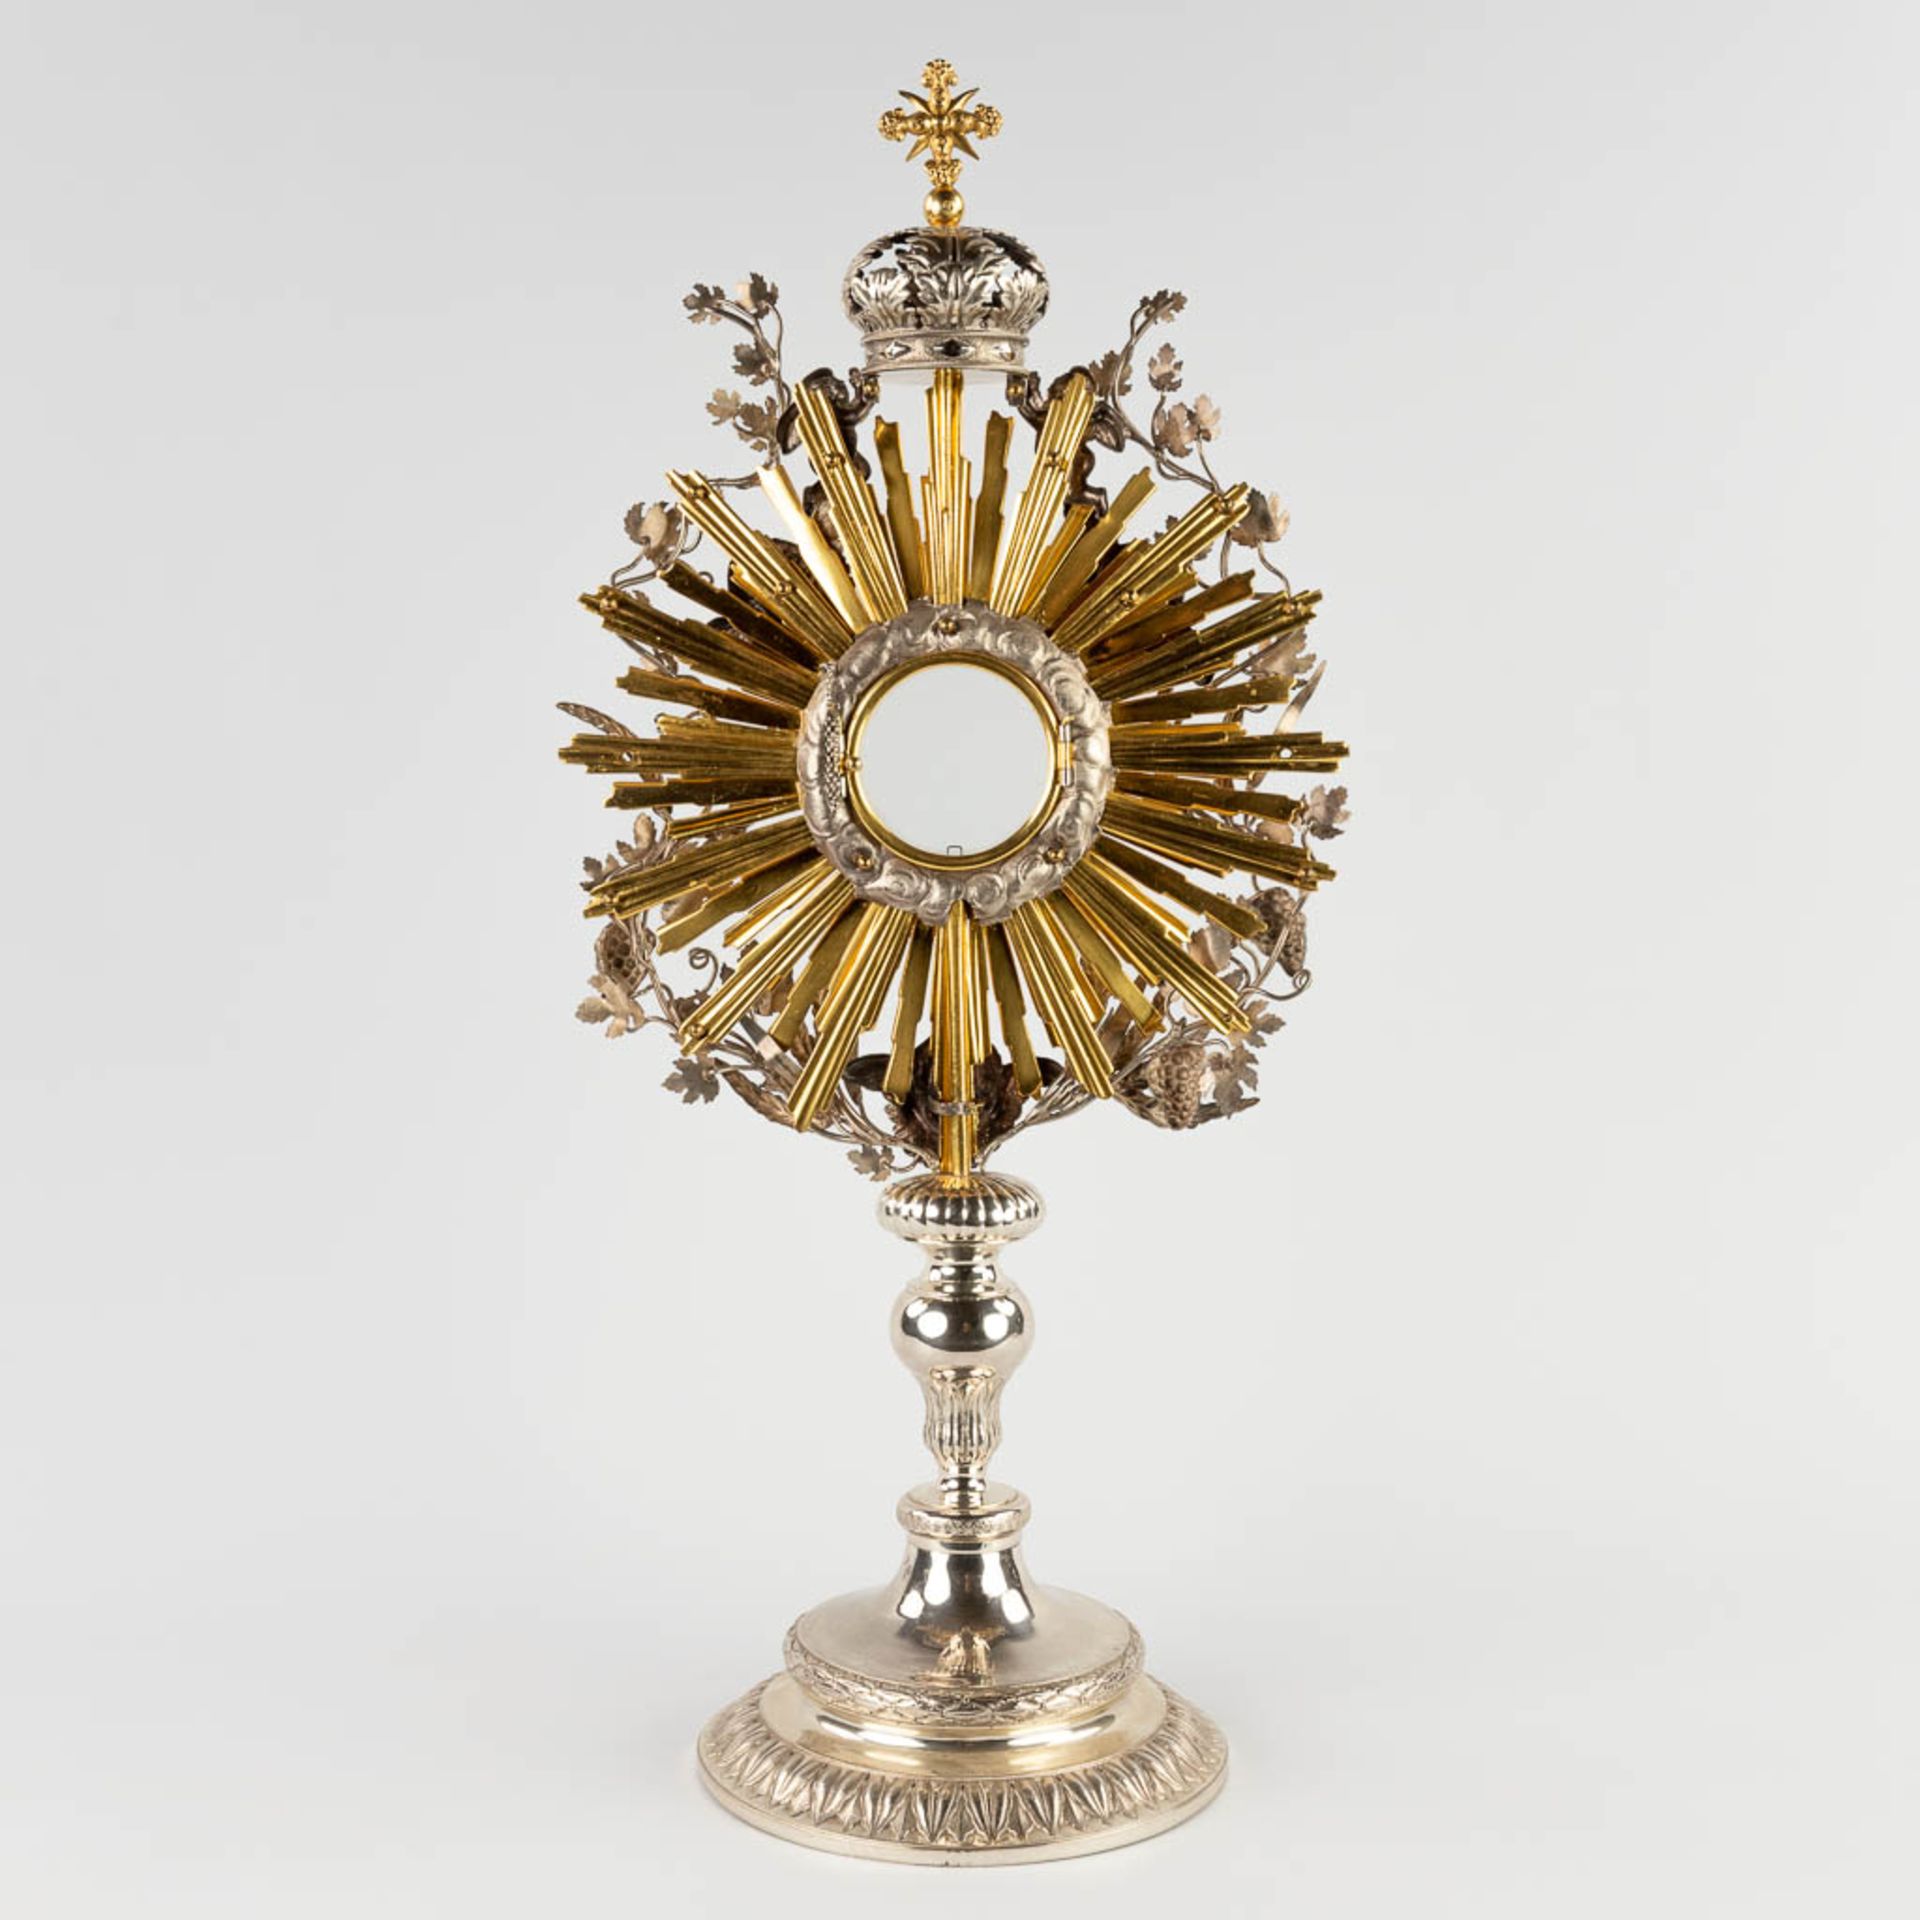 A sunburst monstrance, silver, decorated with angels, wheat and grape vines. Belgium, 19th C. (D:20 - Image 5 of 22